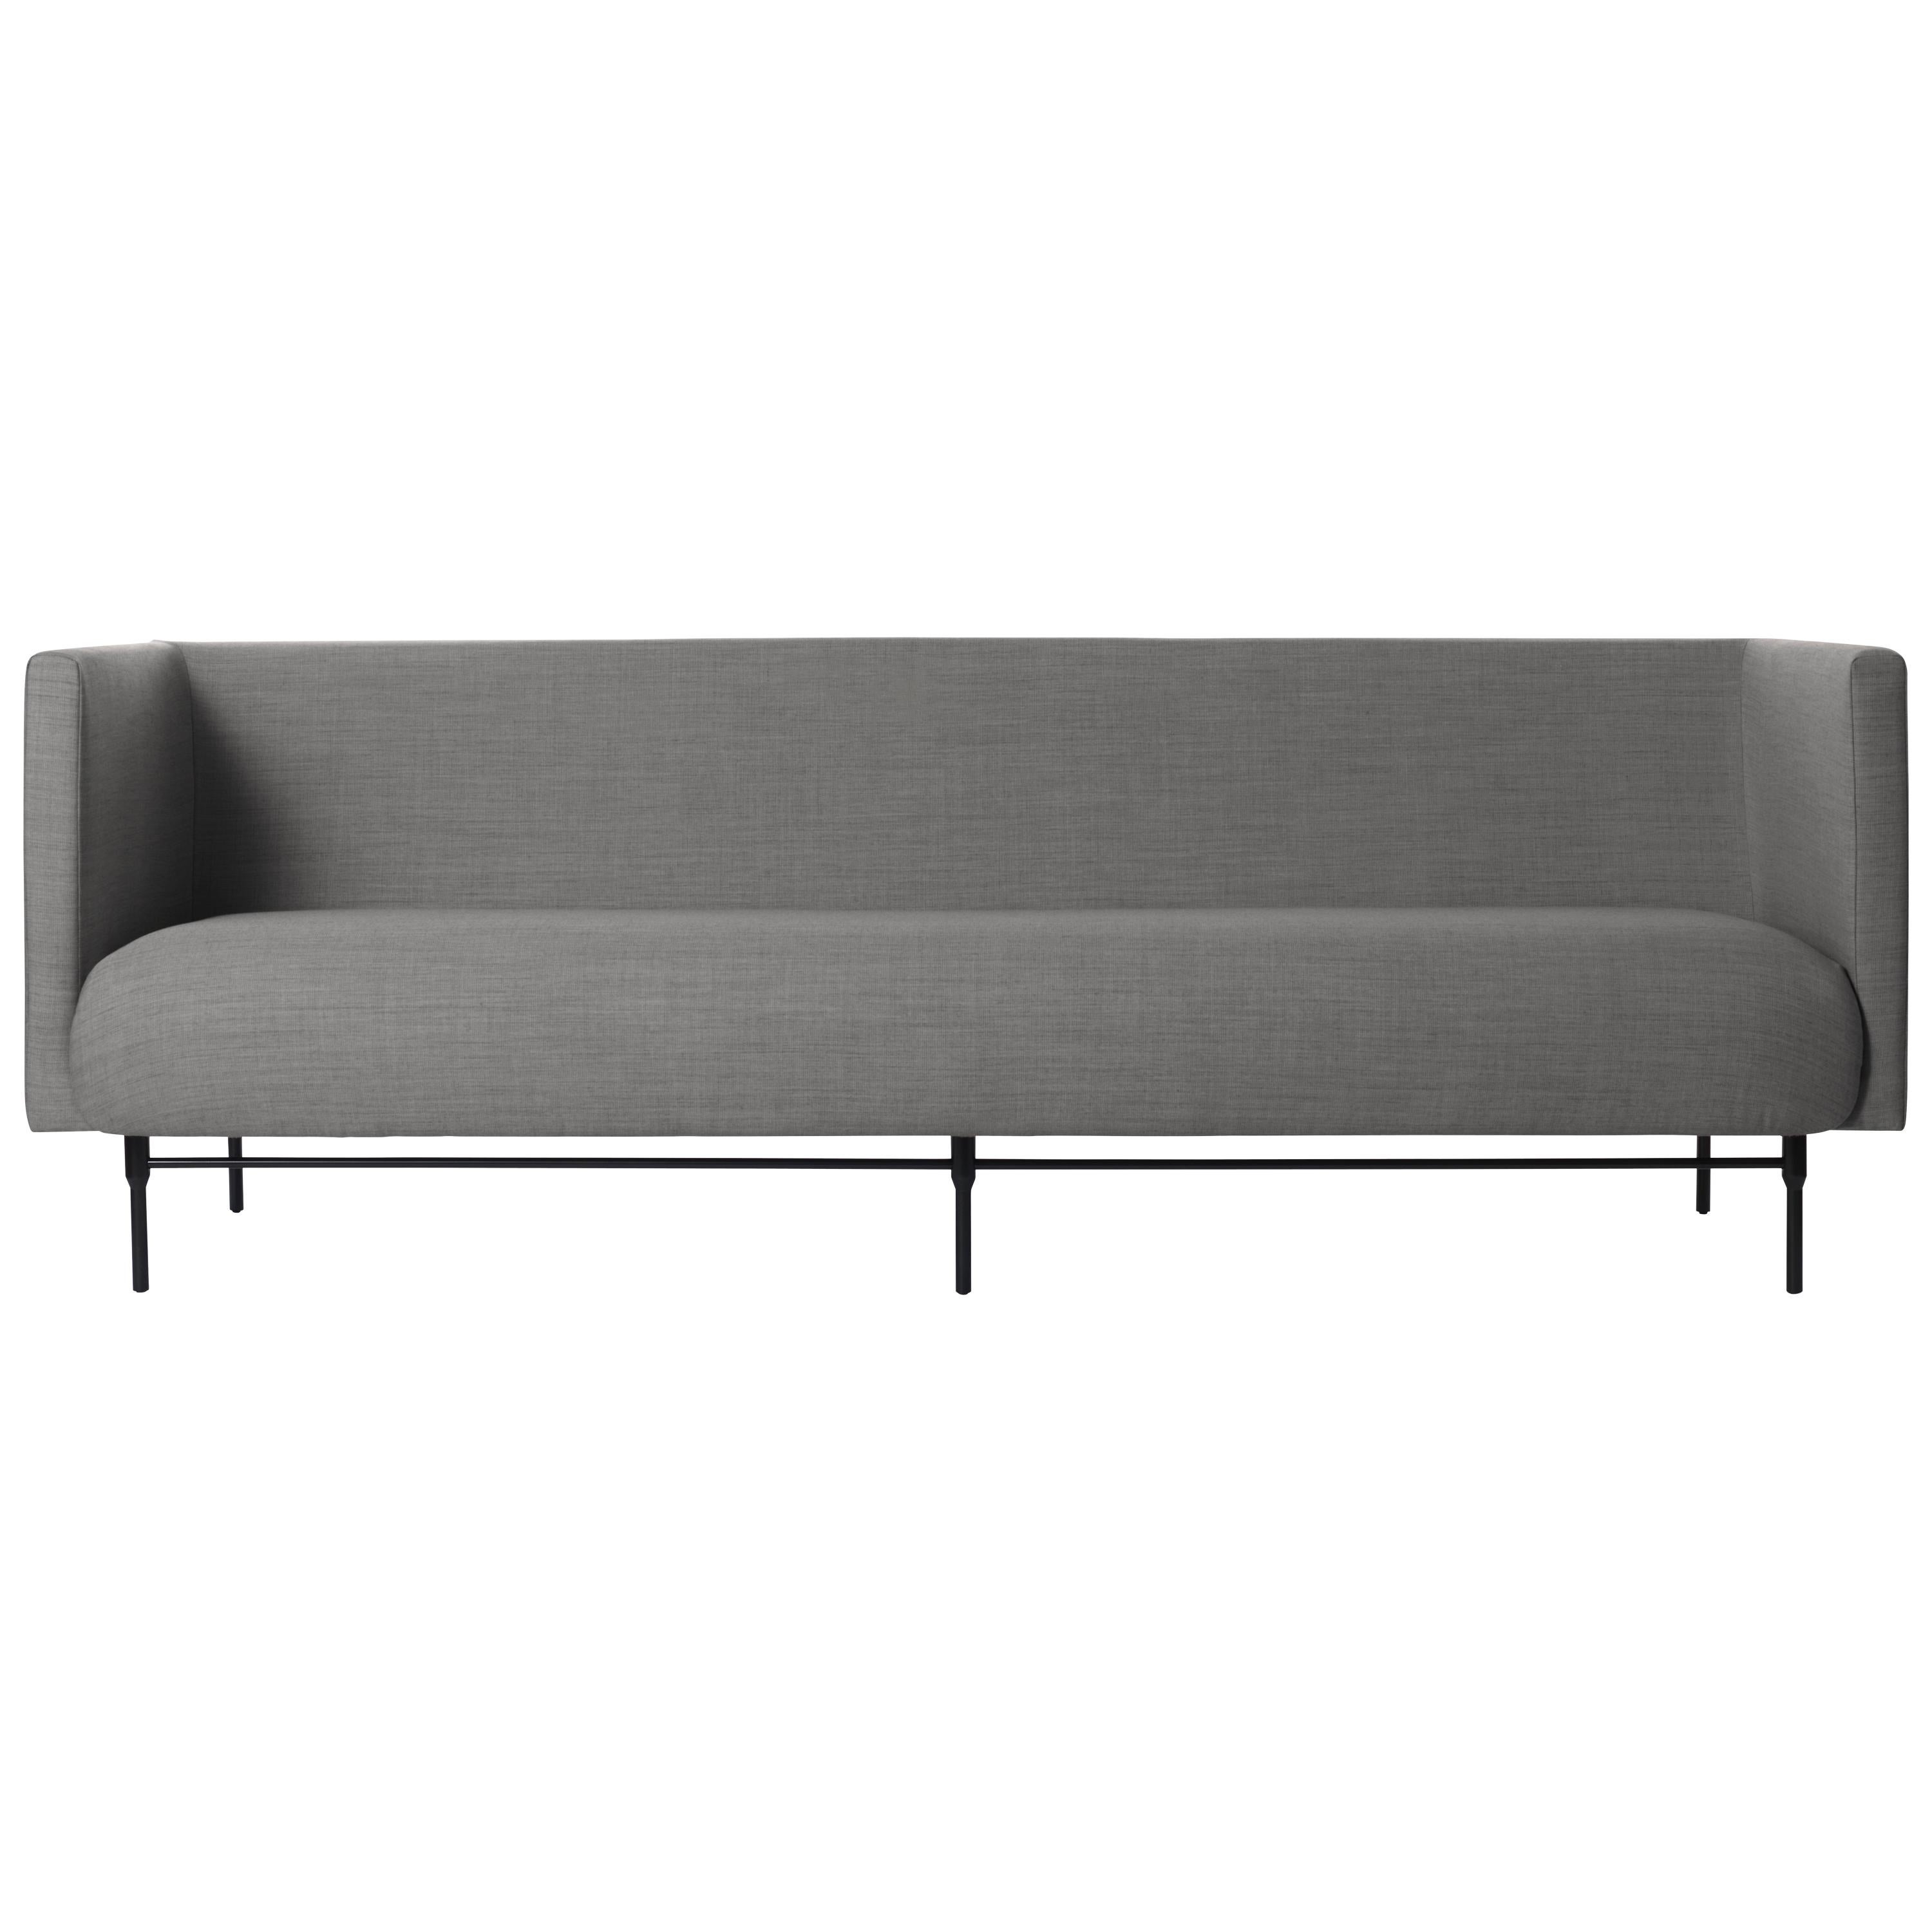 Galore 3-Seat Sofa, by Rikke Frost from Warm Nordic